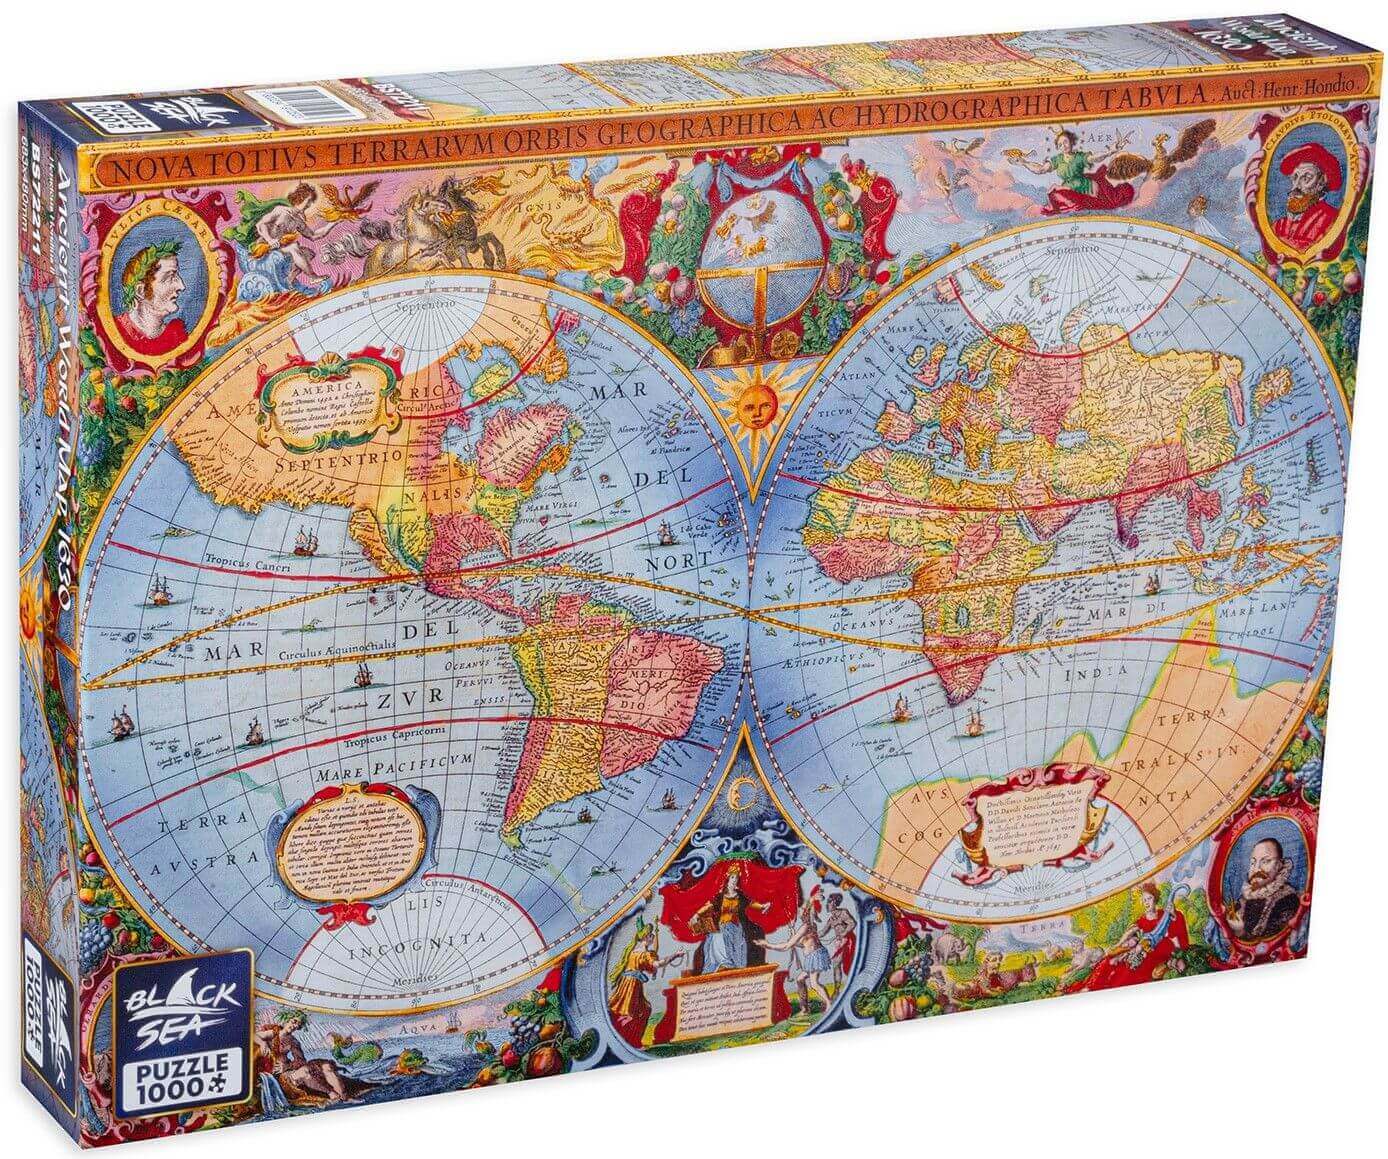 Puzzle Black Sea Premium 1000 pieces - Ancient World Map, 1630, The talented Dutch engraver and cartographer Henry Hondios (Henricus Hondius) created an ancient map in 1630, which since then arouses admiration, and from the distance of time we can rightly